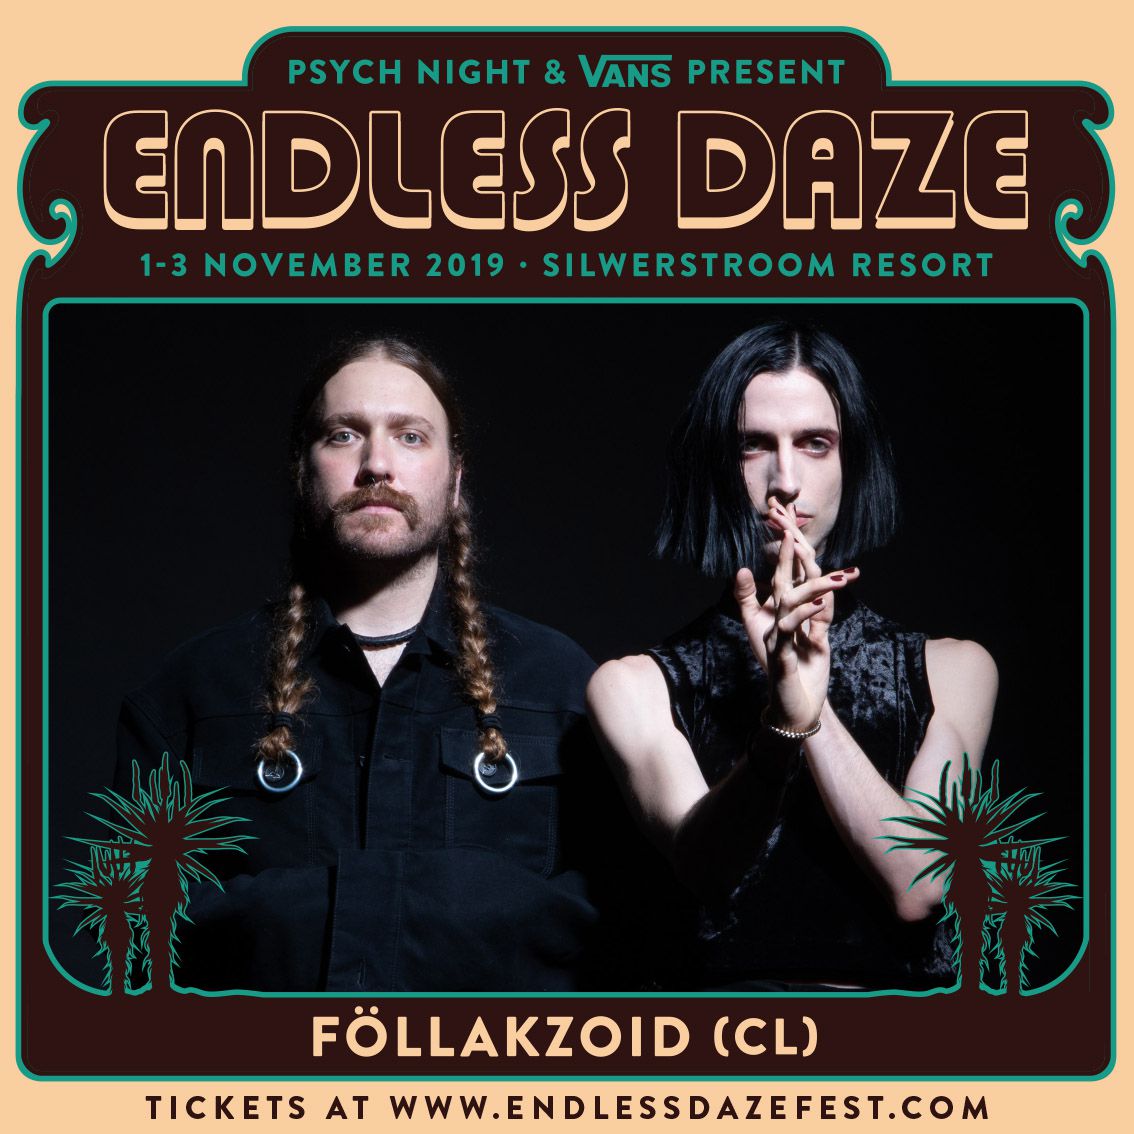 10 additional acts added to Endless Daze 2019 lineup